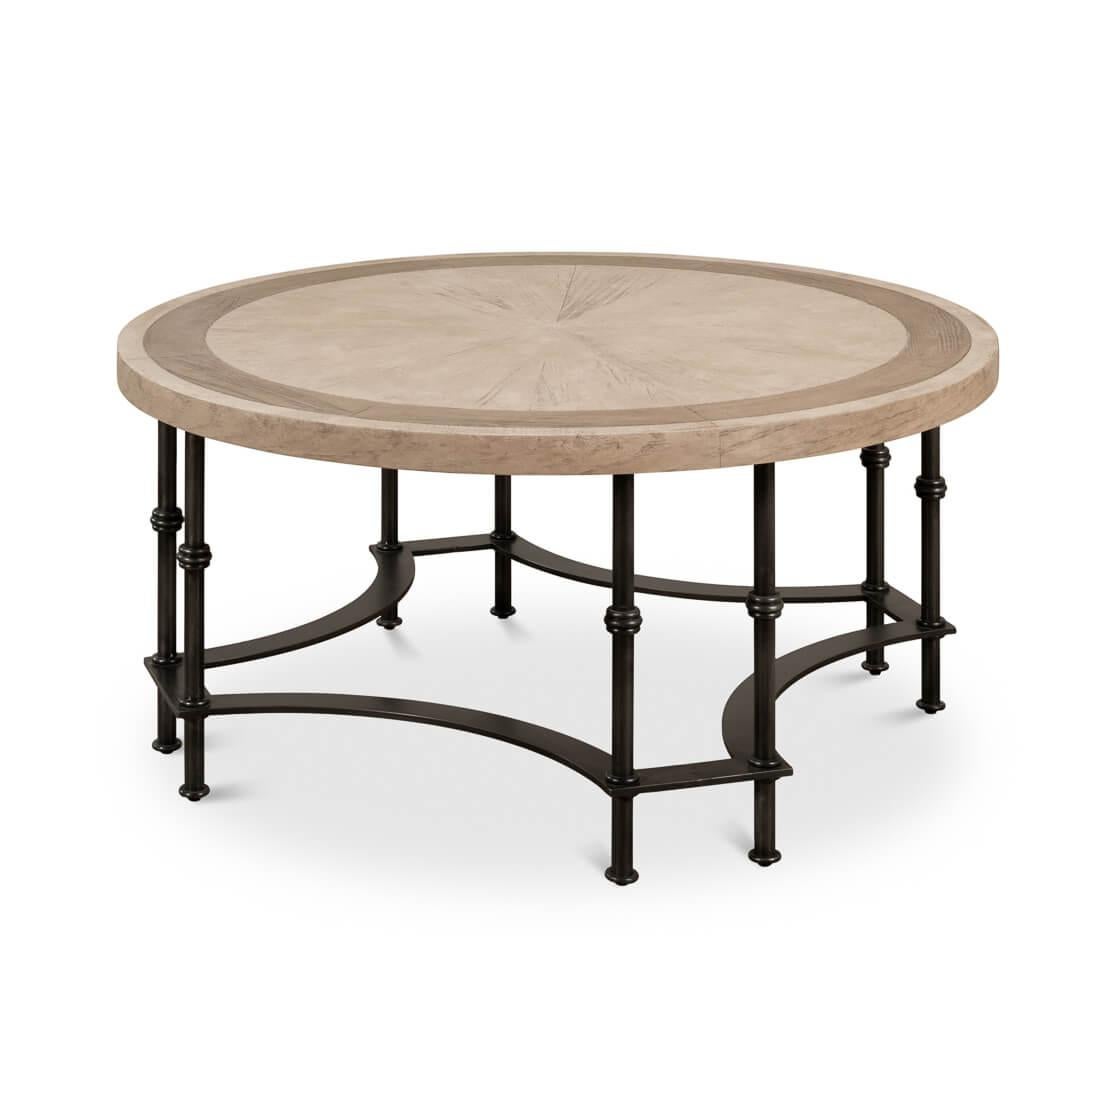 The foundation of this table is a masterpiece of metalwork, boasting both tubular and flat elements intricately forged into a base that embodies artistry and geometric symmetry.

The substantial pine tabletop, presented in a rustic Barn Grey finish,